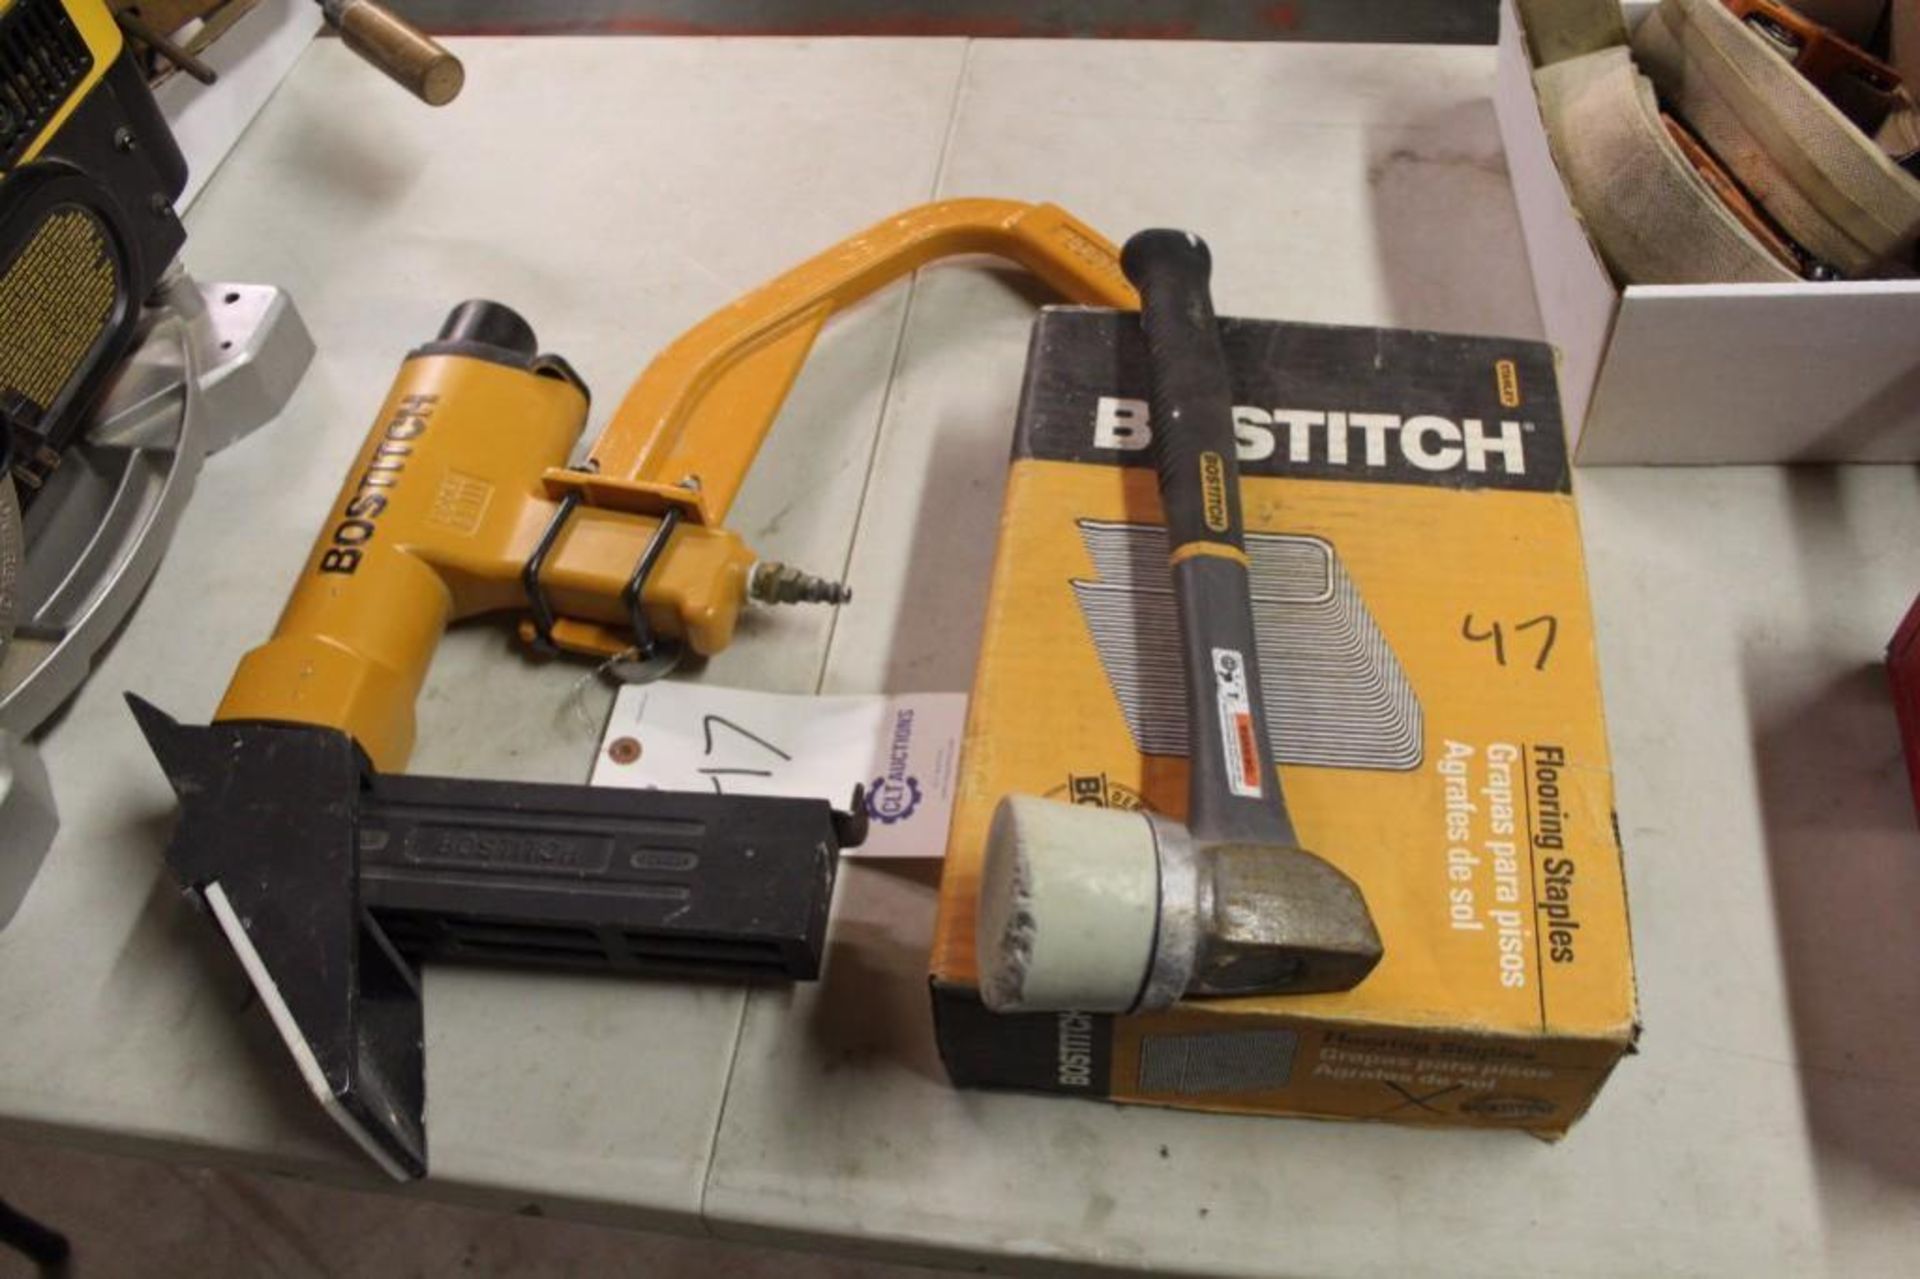 Bostitch MIII flooring nailer with staples and mallet